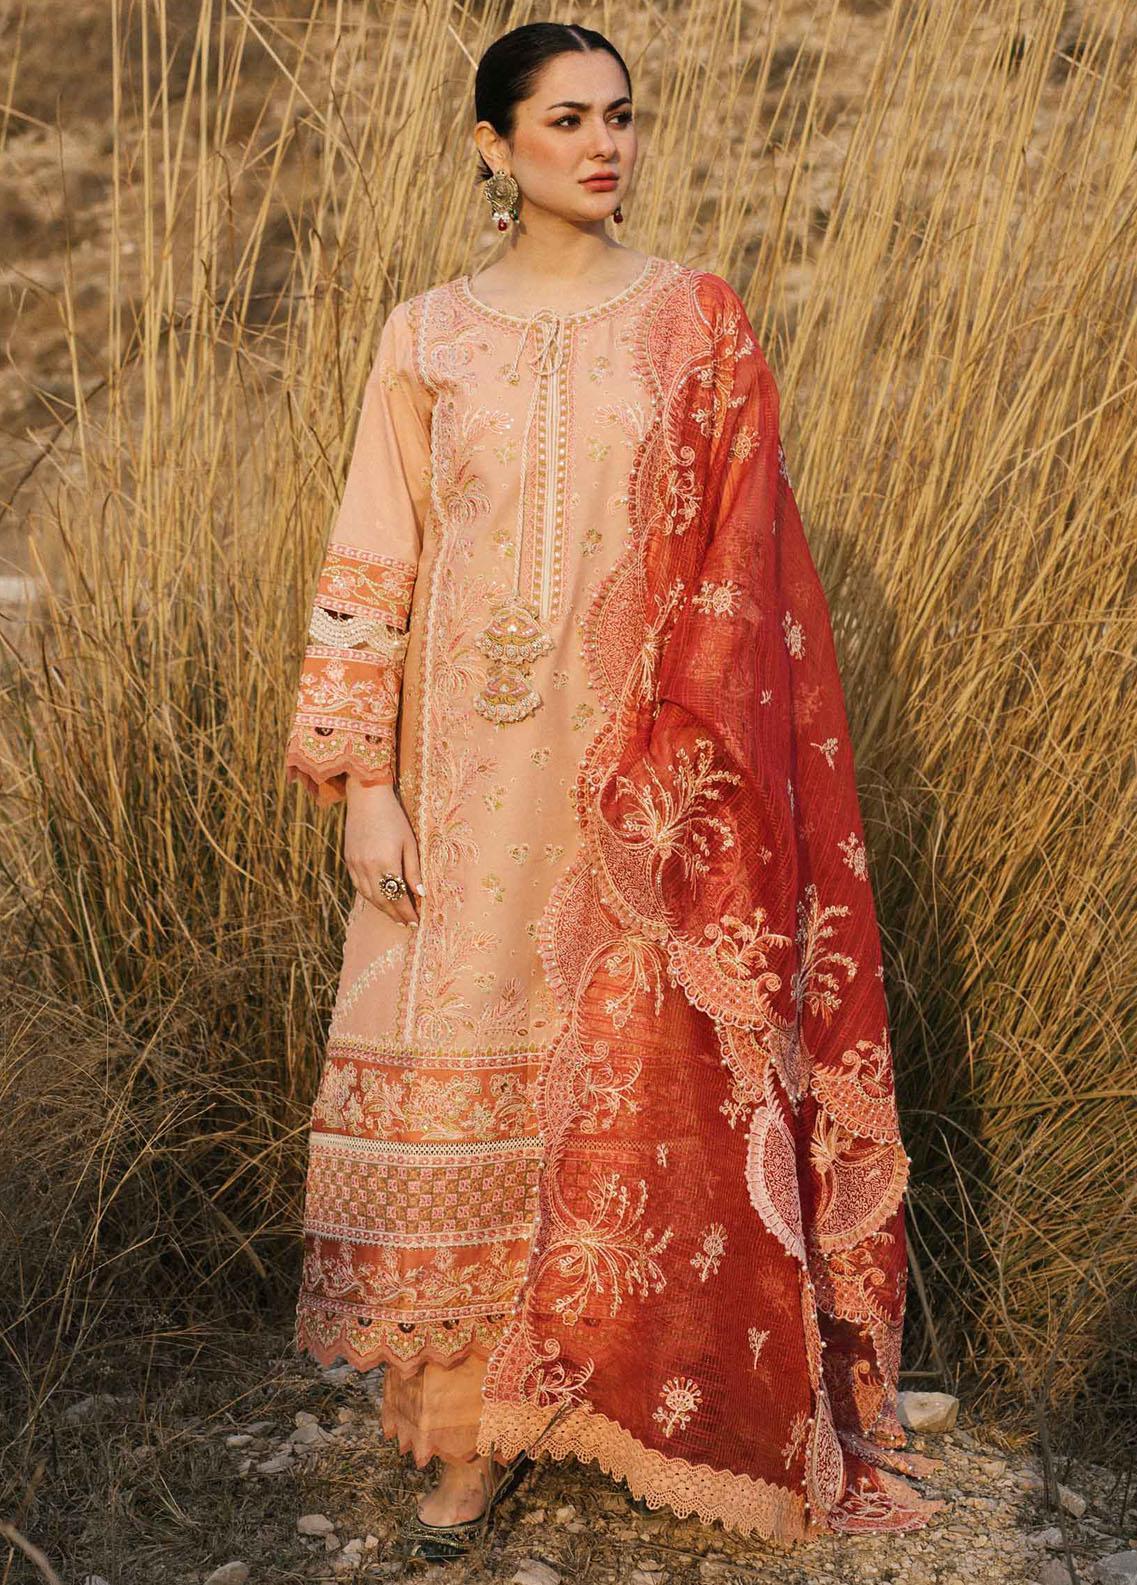 Marahil By Qalamkar Embroidered Lawn Suit Unstitched 3 Piece 08 Sefa QML22 – Summer Collection